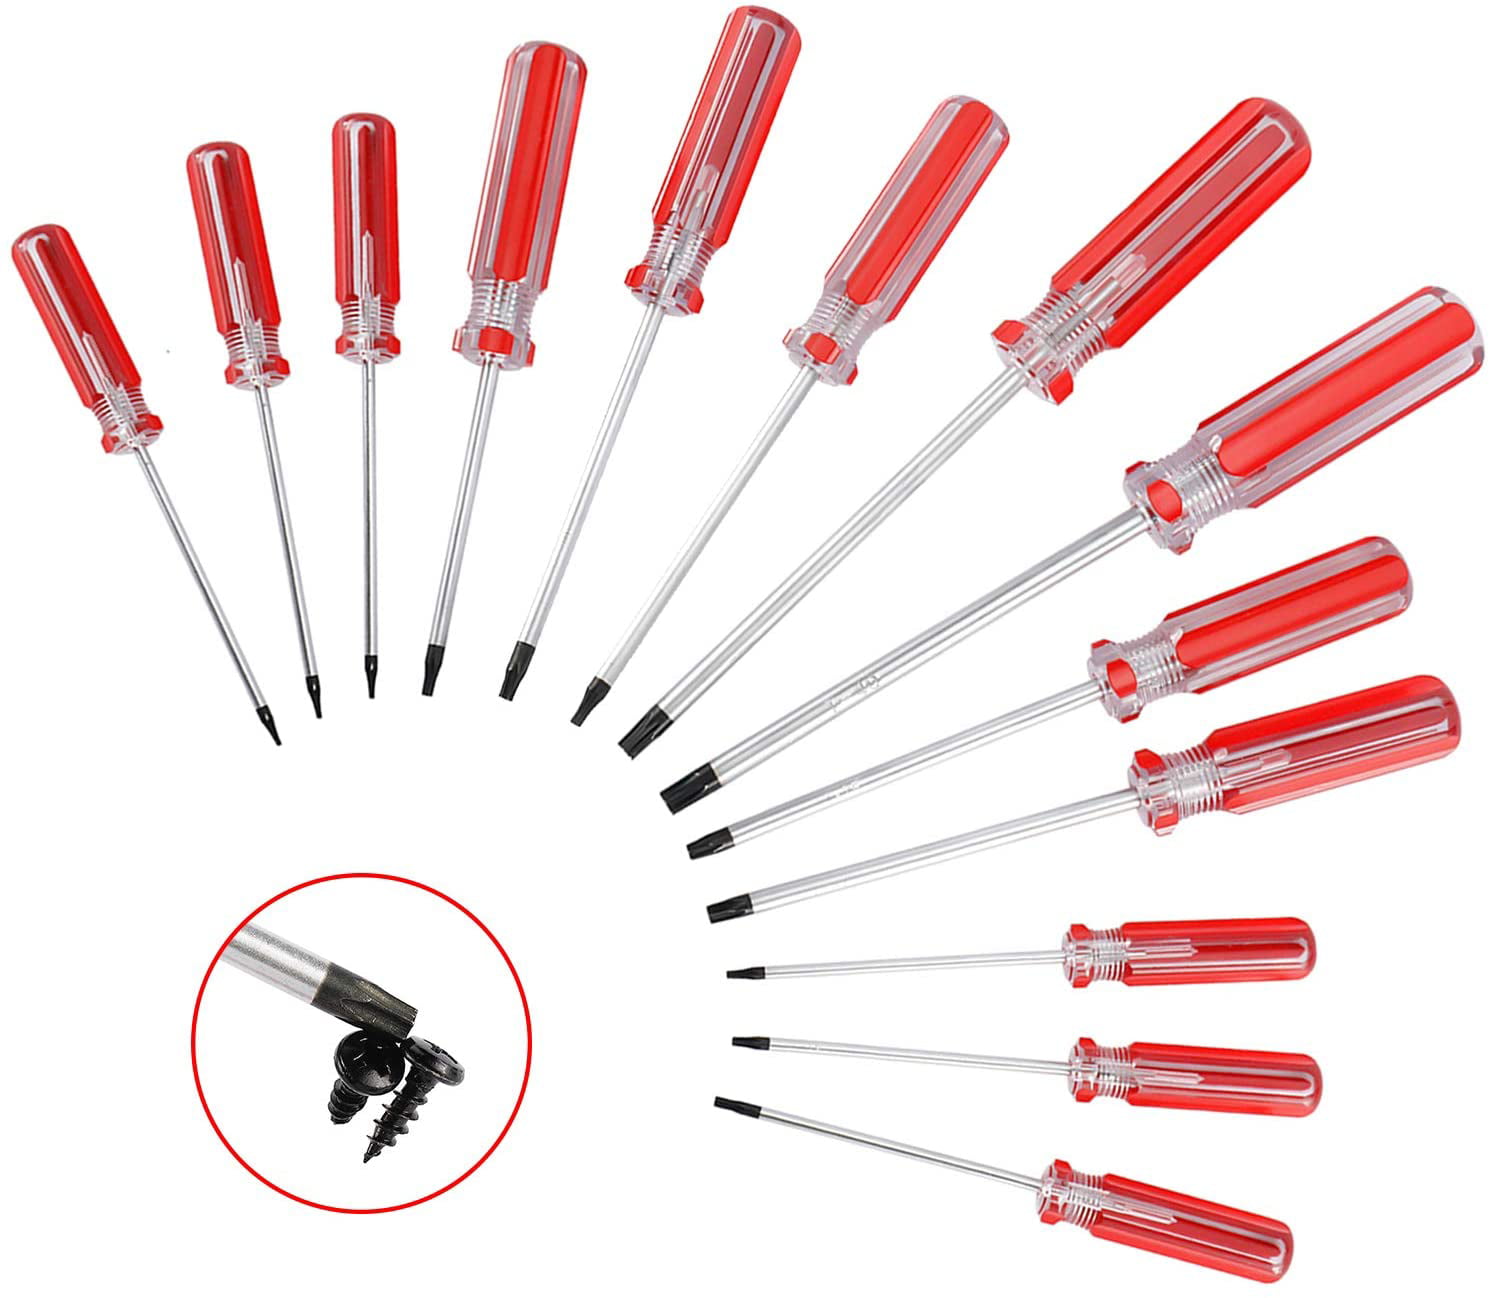 13Pcs Magnetic Torx Screwdrivers Set with Bag Includes T4 T40 for Repairing 